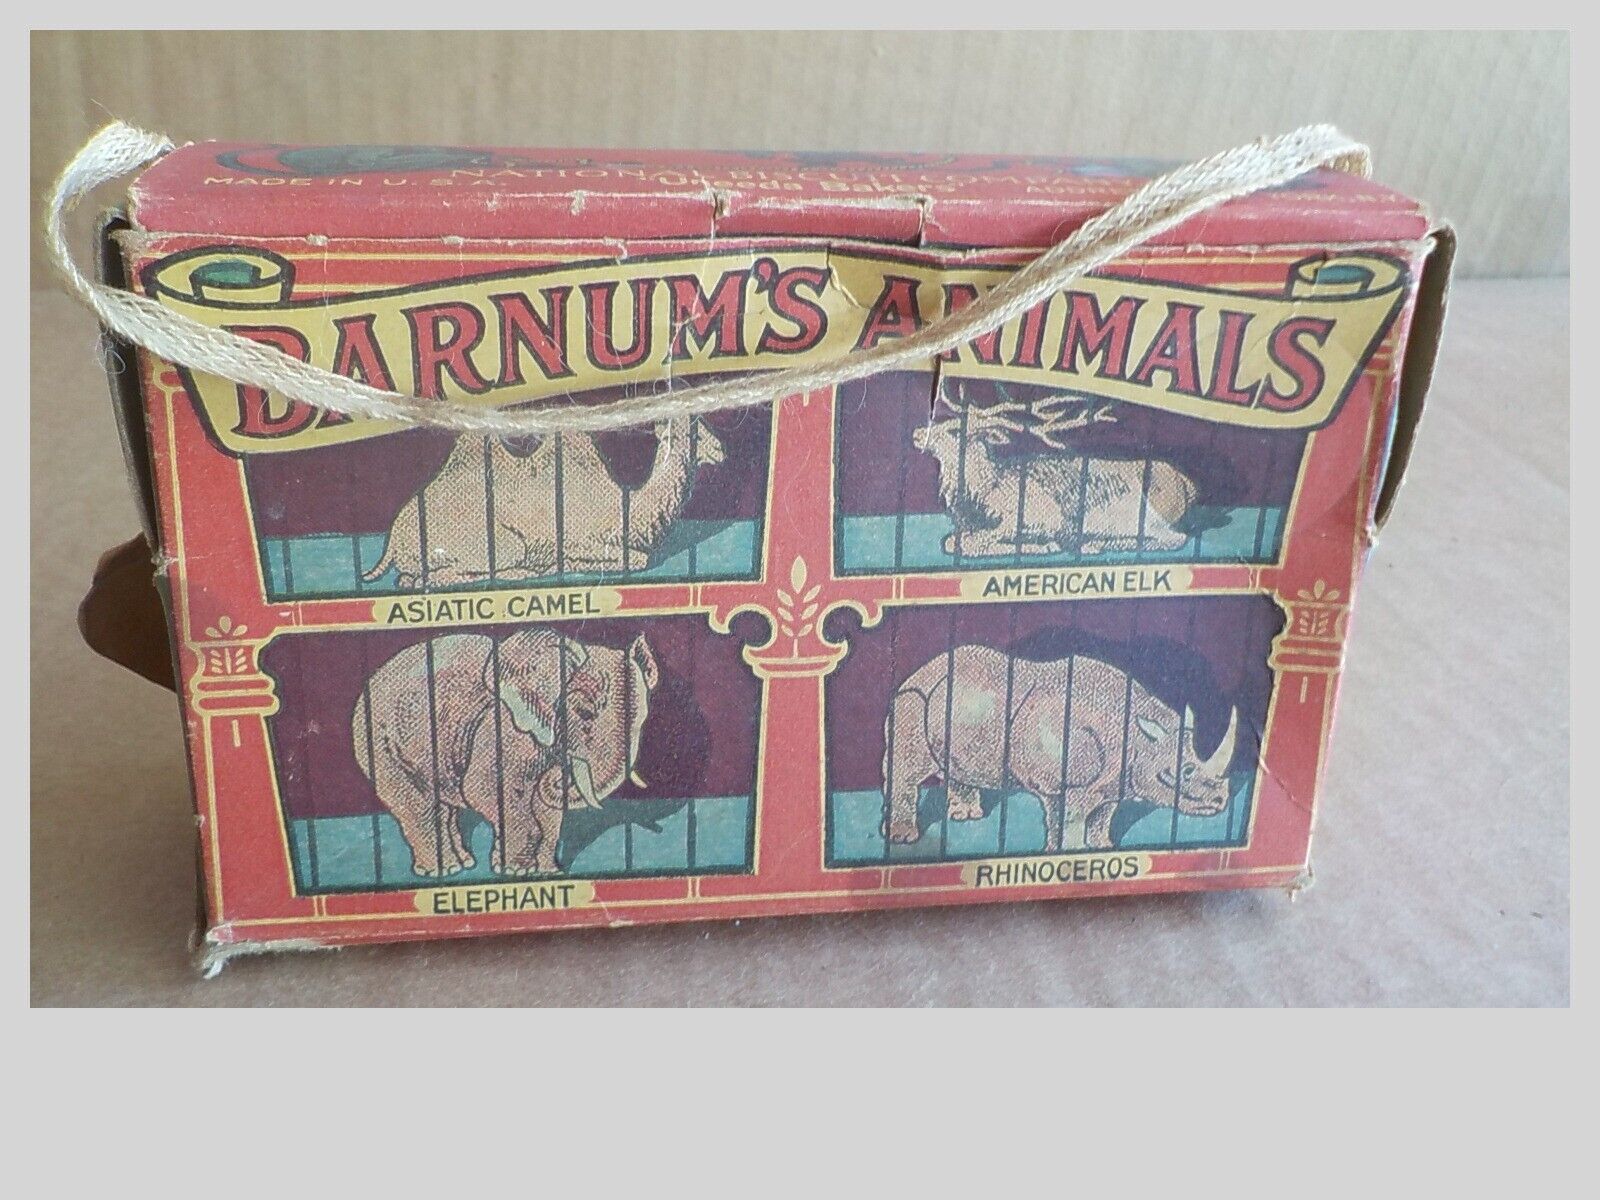 VGT BARNUMS ANIMALS NATIONAL BISCUIT UNEEDA COOKIE BOX PATENTED DATE 3-17-1914